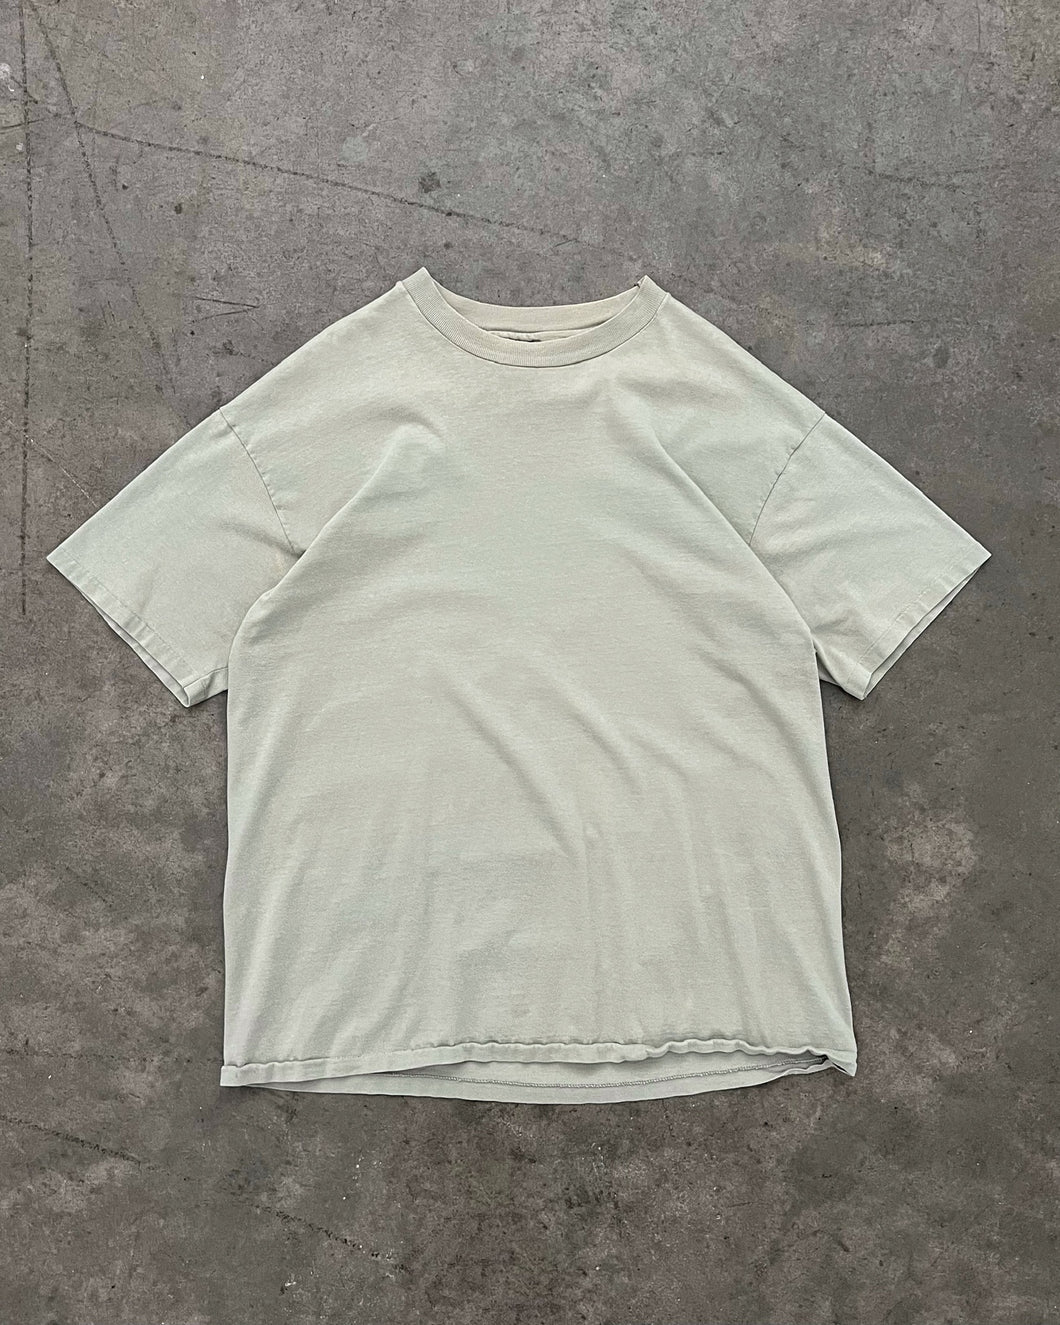 SINGLE STITCHED PALE OLIVE GREEN TEE - 1990S